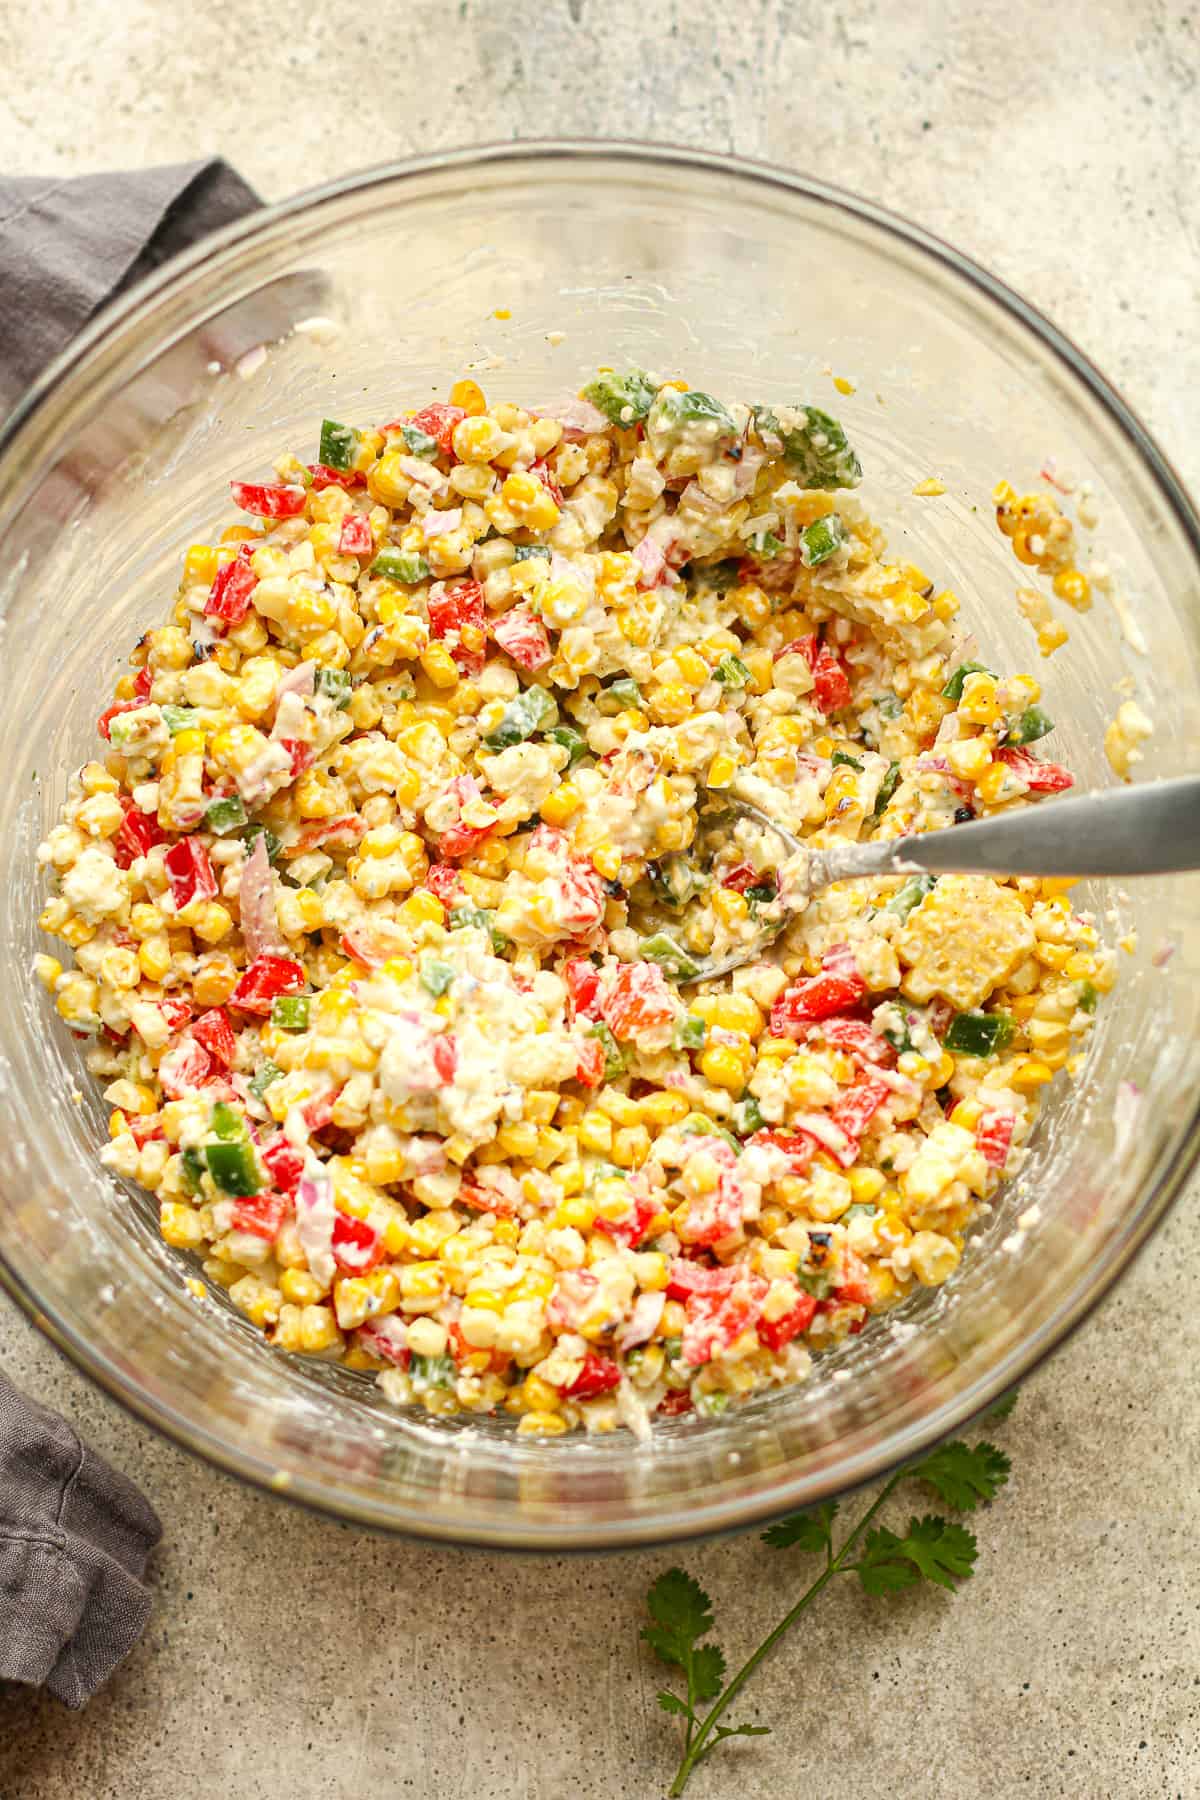 A bowl of the corn and veggies plus the dressing mixed in.